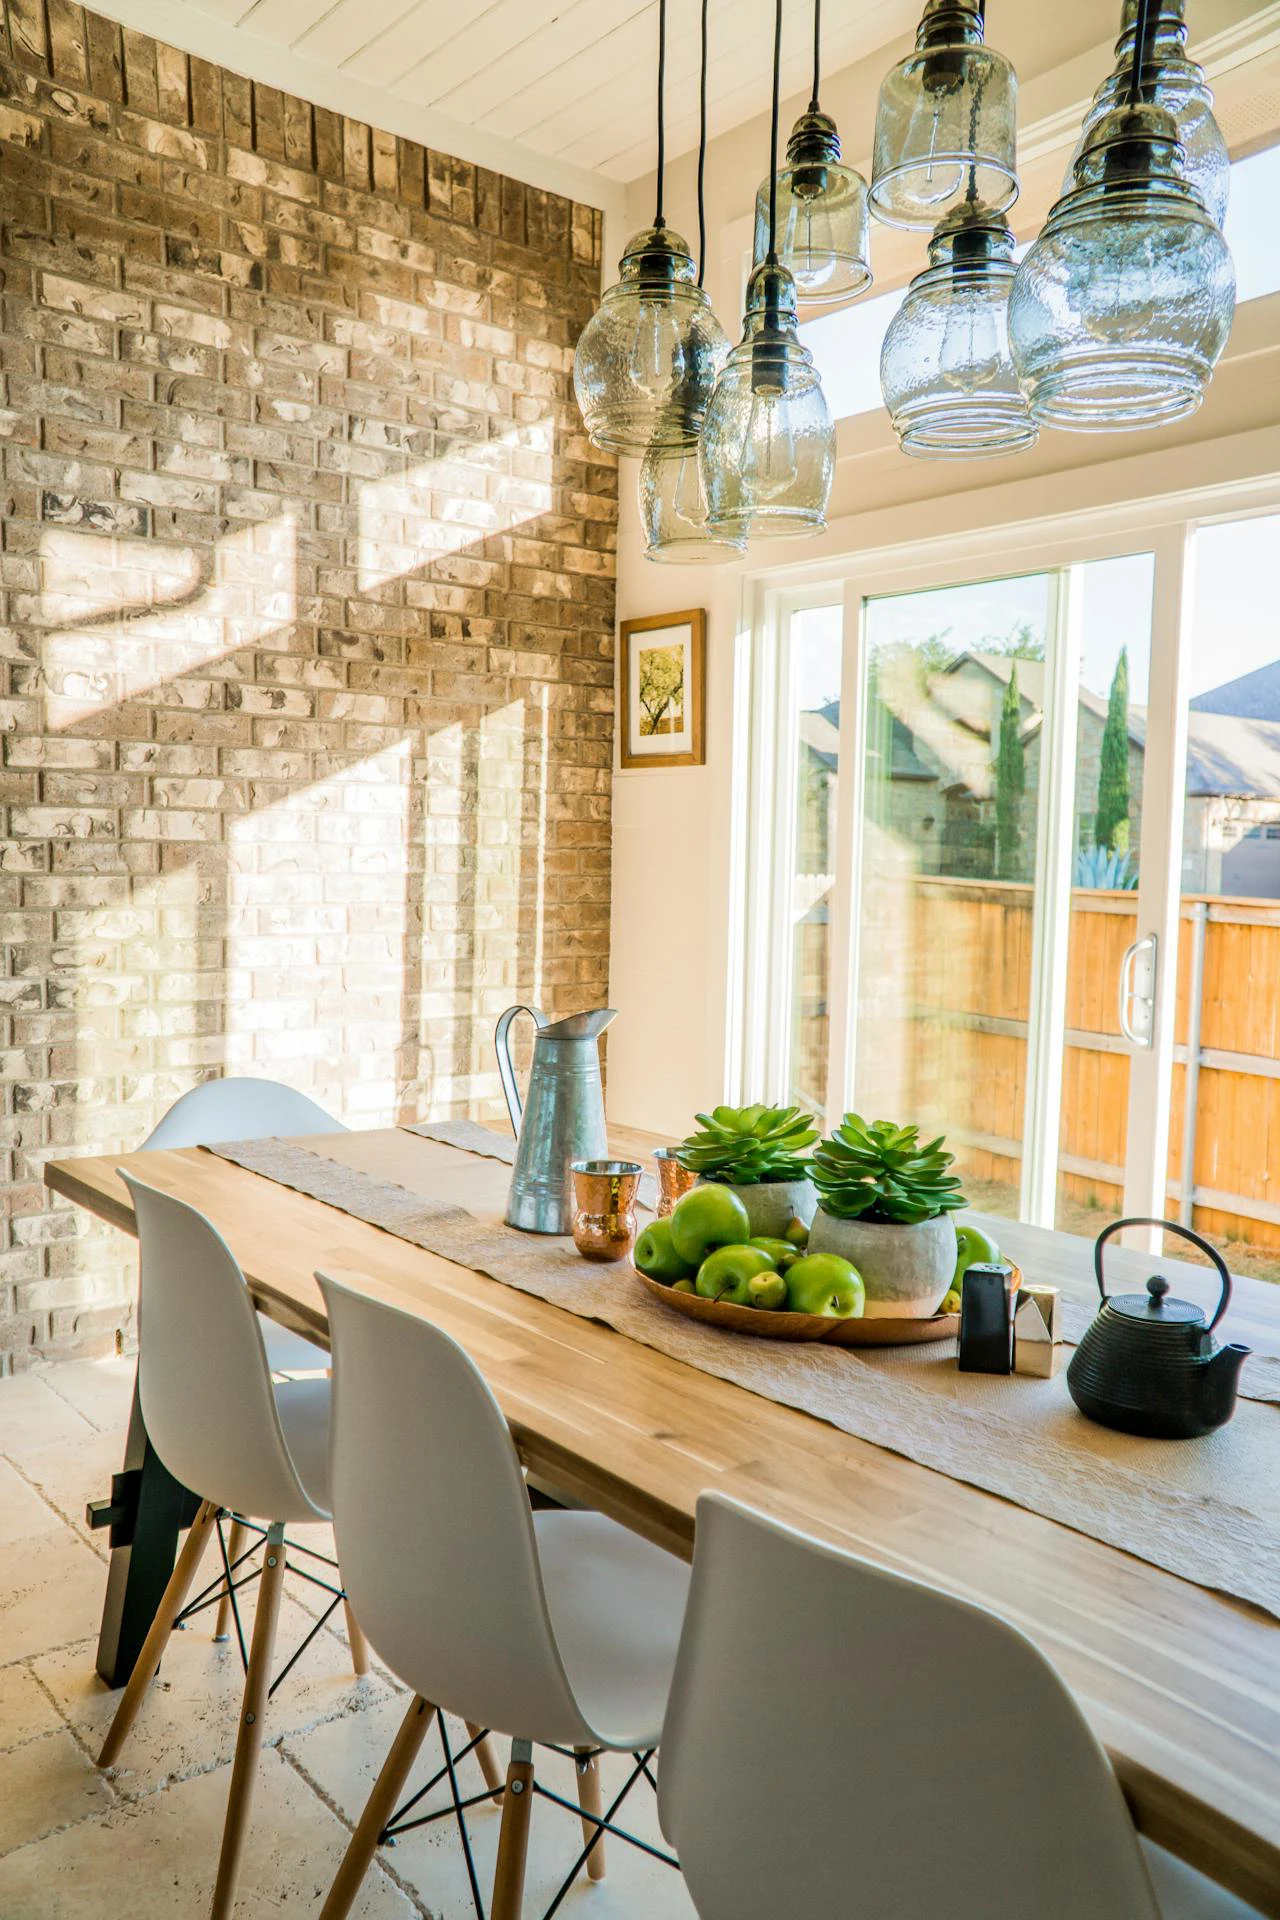 bright kitchen with wooden table, patio doors, and exposed brickwork wall